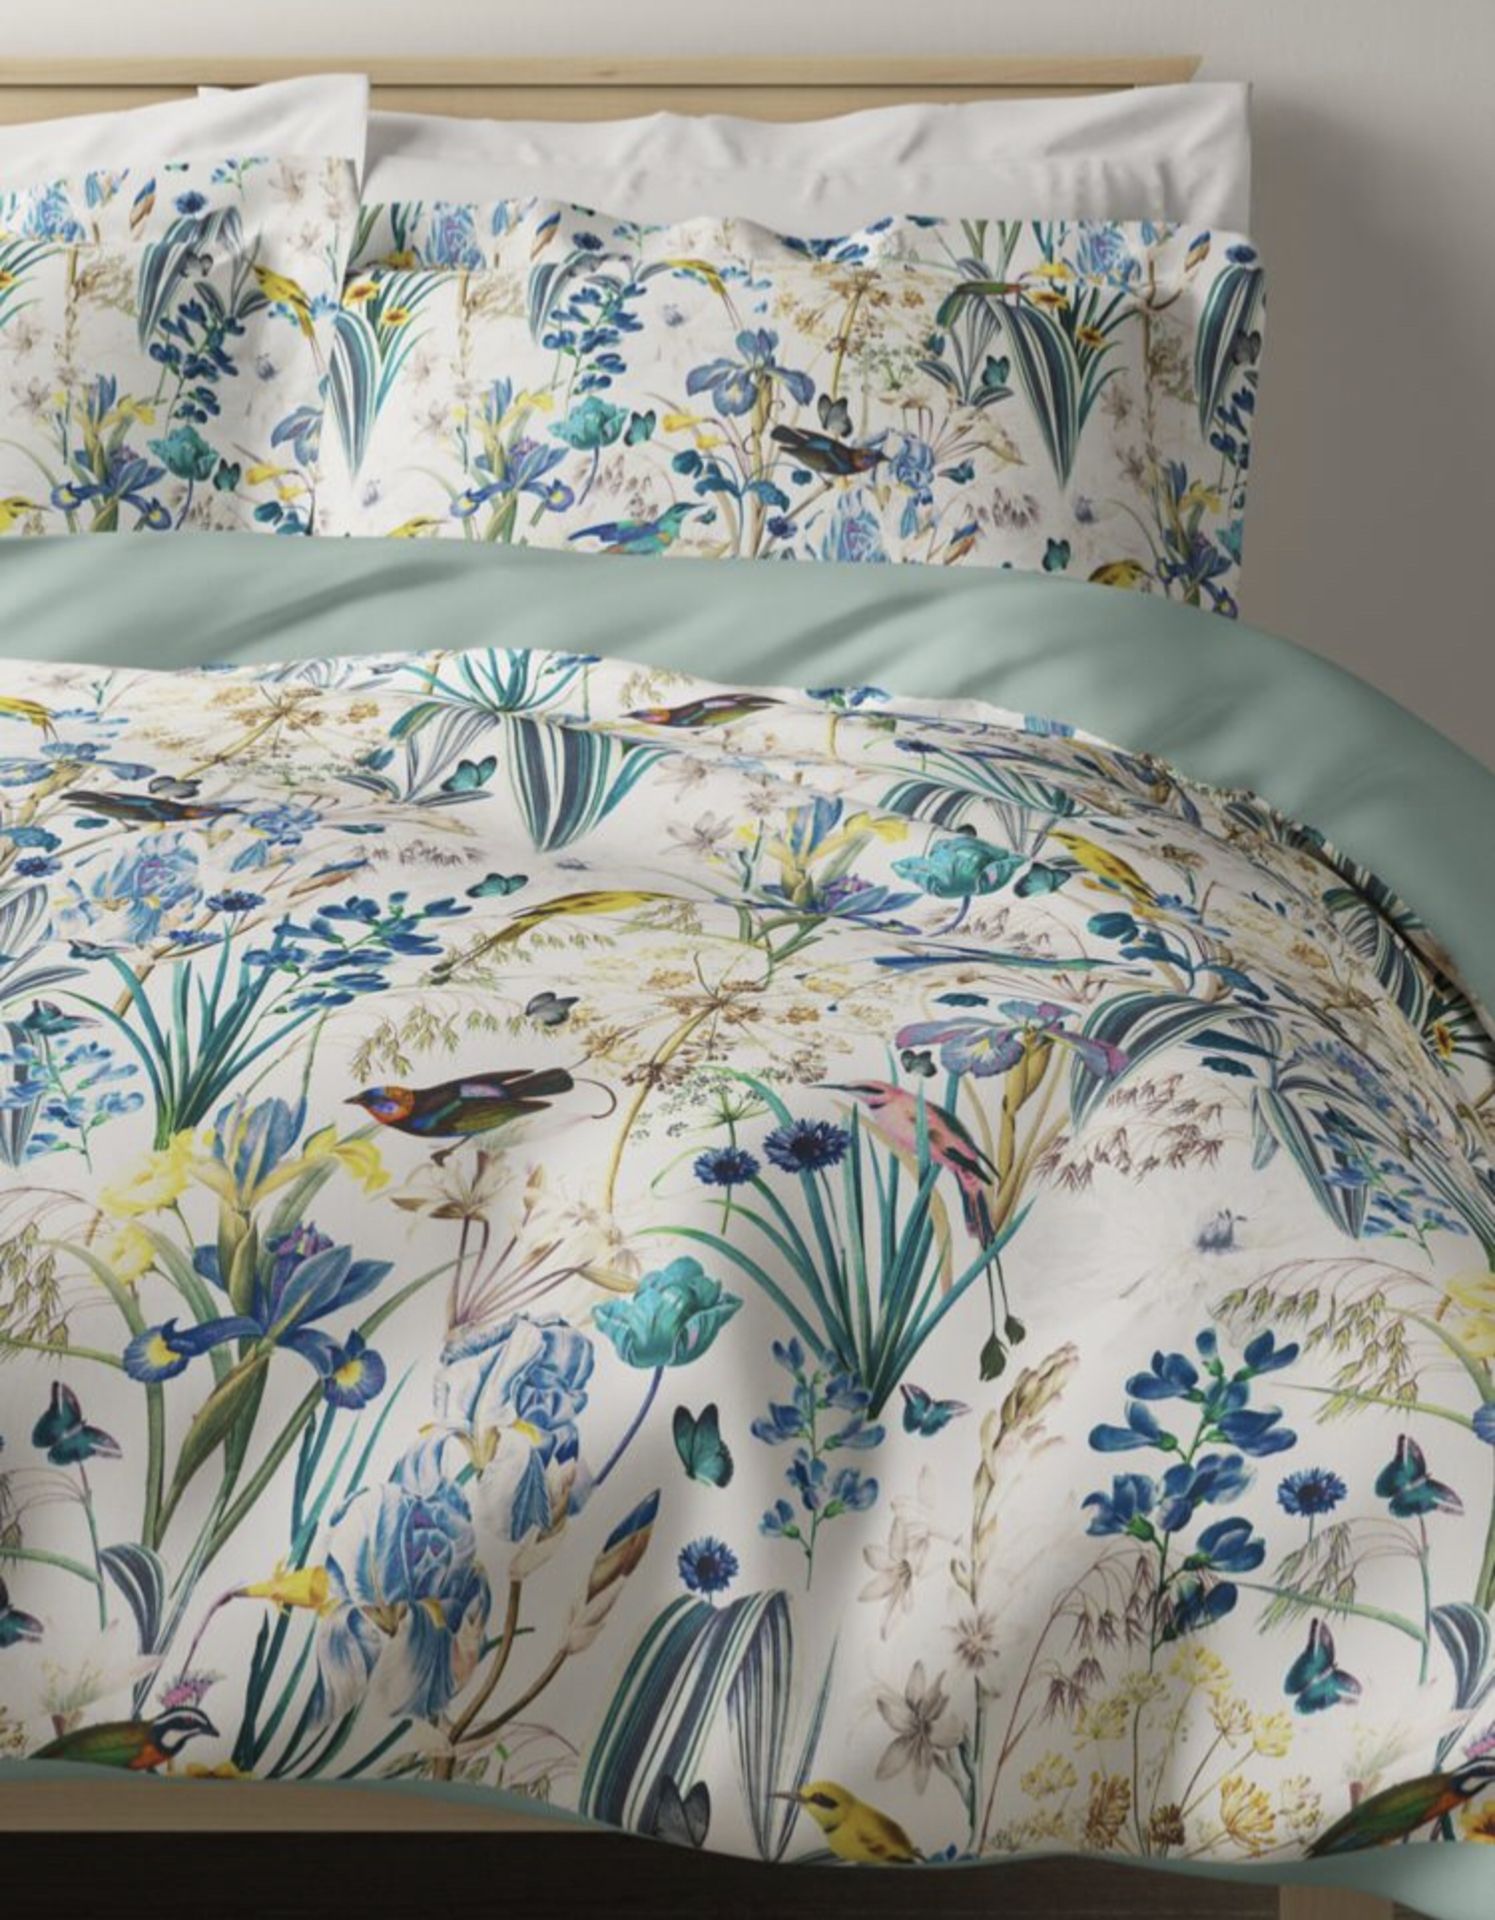 Pure Cotton Sateen Harriet Printed Bedding Set, King Size - Image 2 of 2